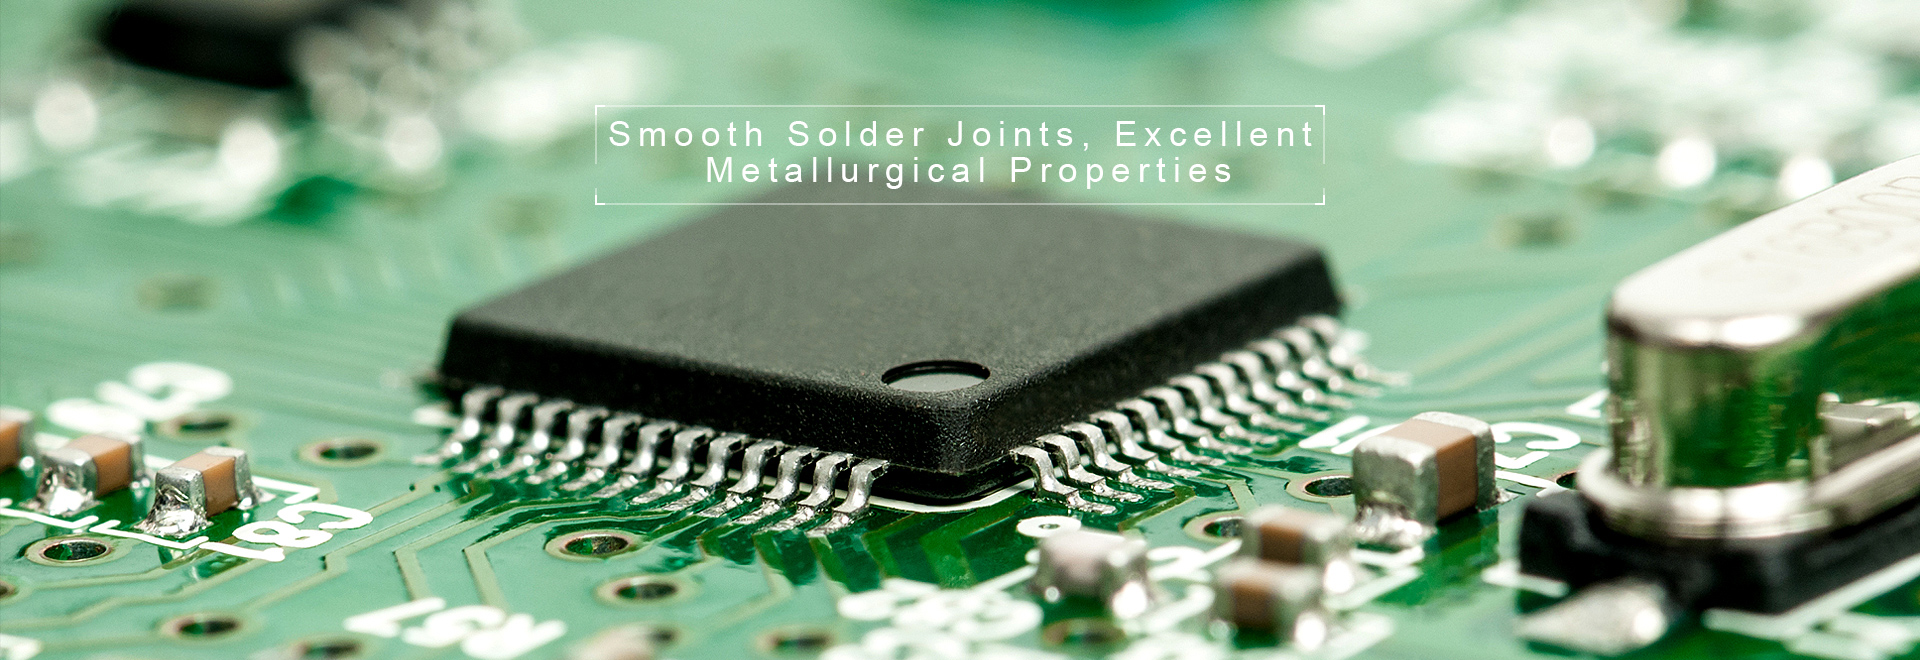 Smooth Solder Joints, Excellen